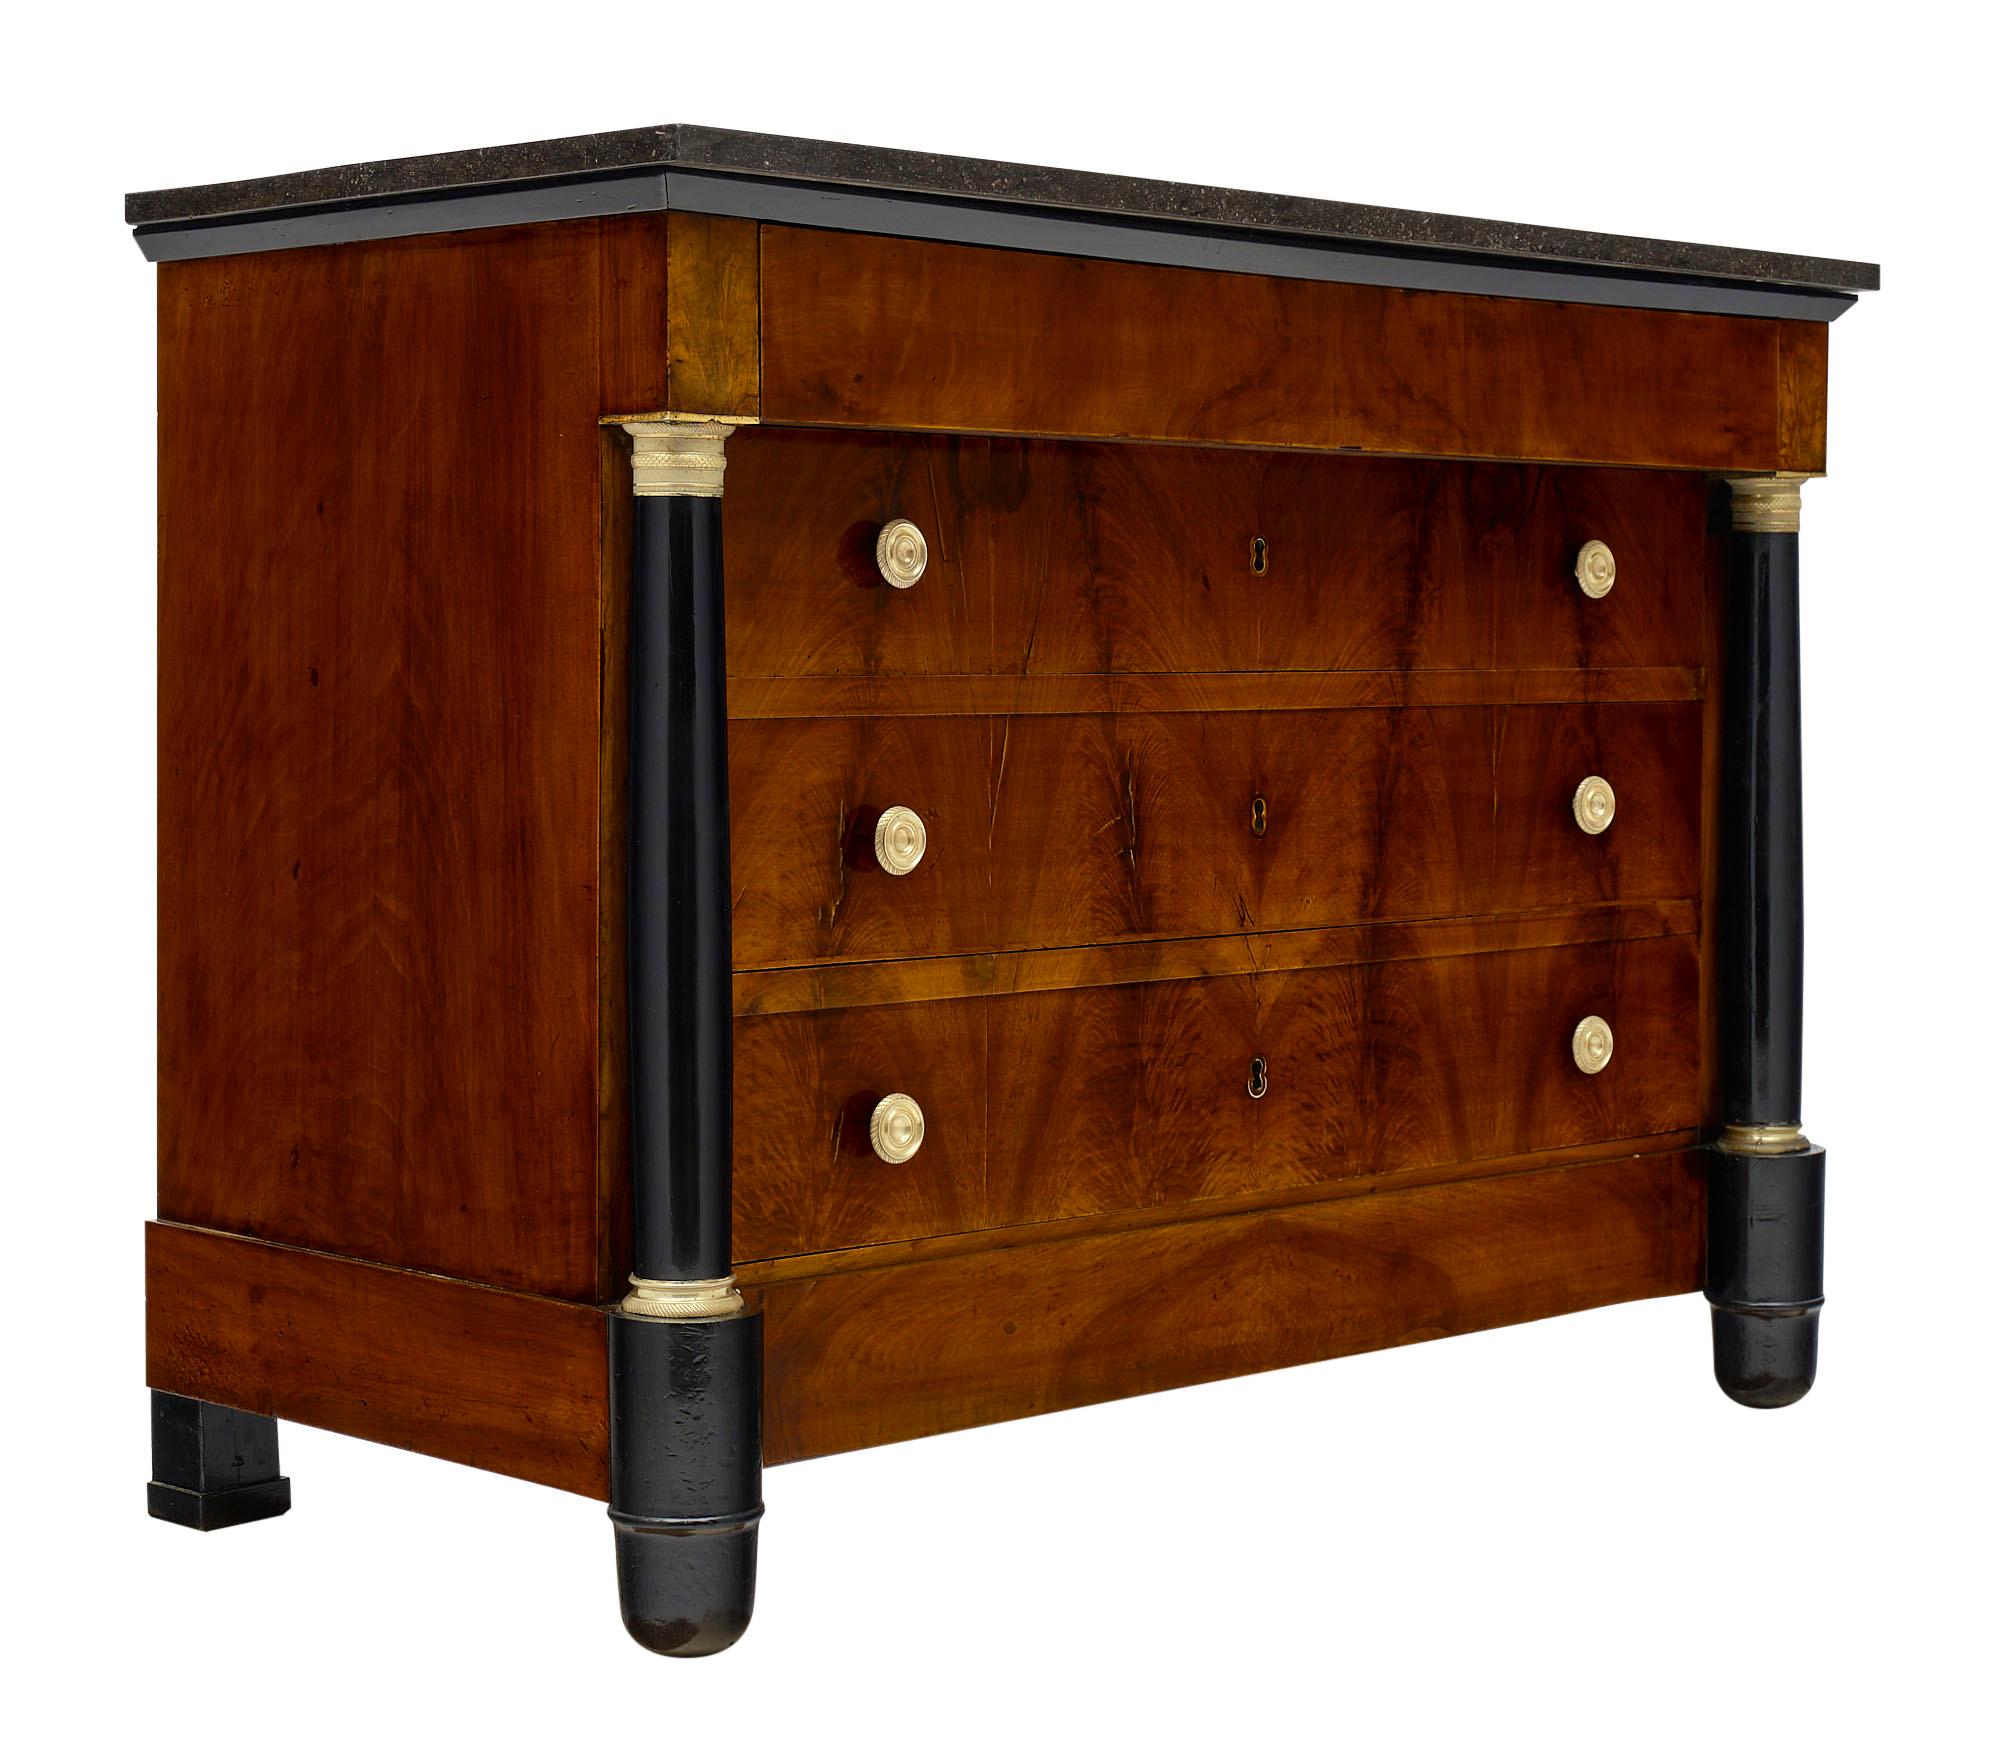 Empire style antique French chest of drawers made of mahogany and finished with lustrous French polish. The detached columns are ebonized and feature finely cast gilt bronze hardware. We love the black marble slab which is original and intact. There